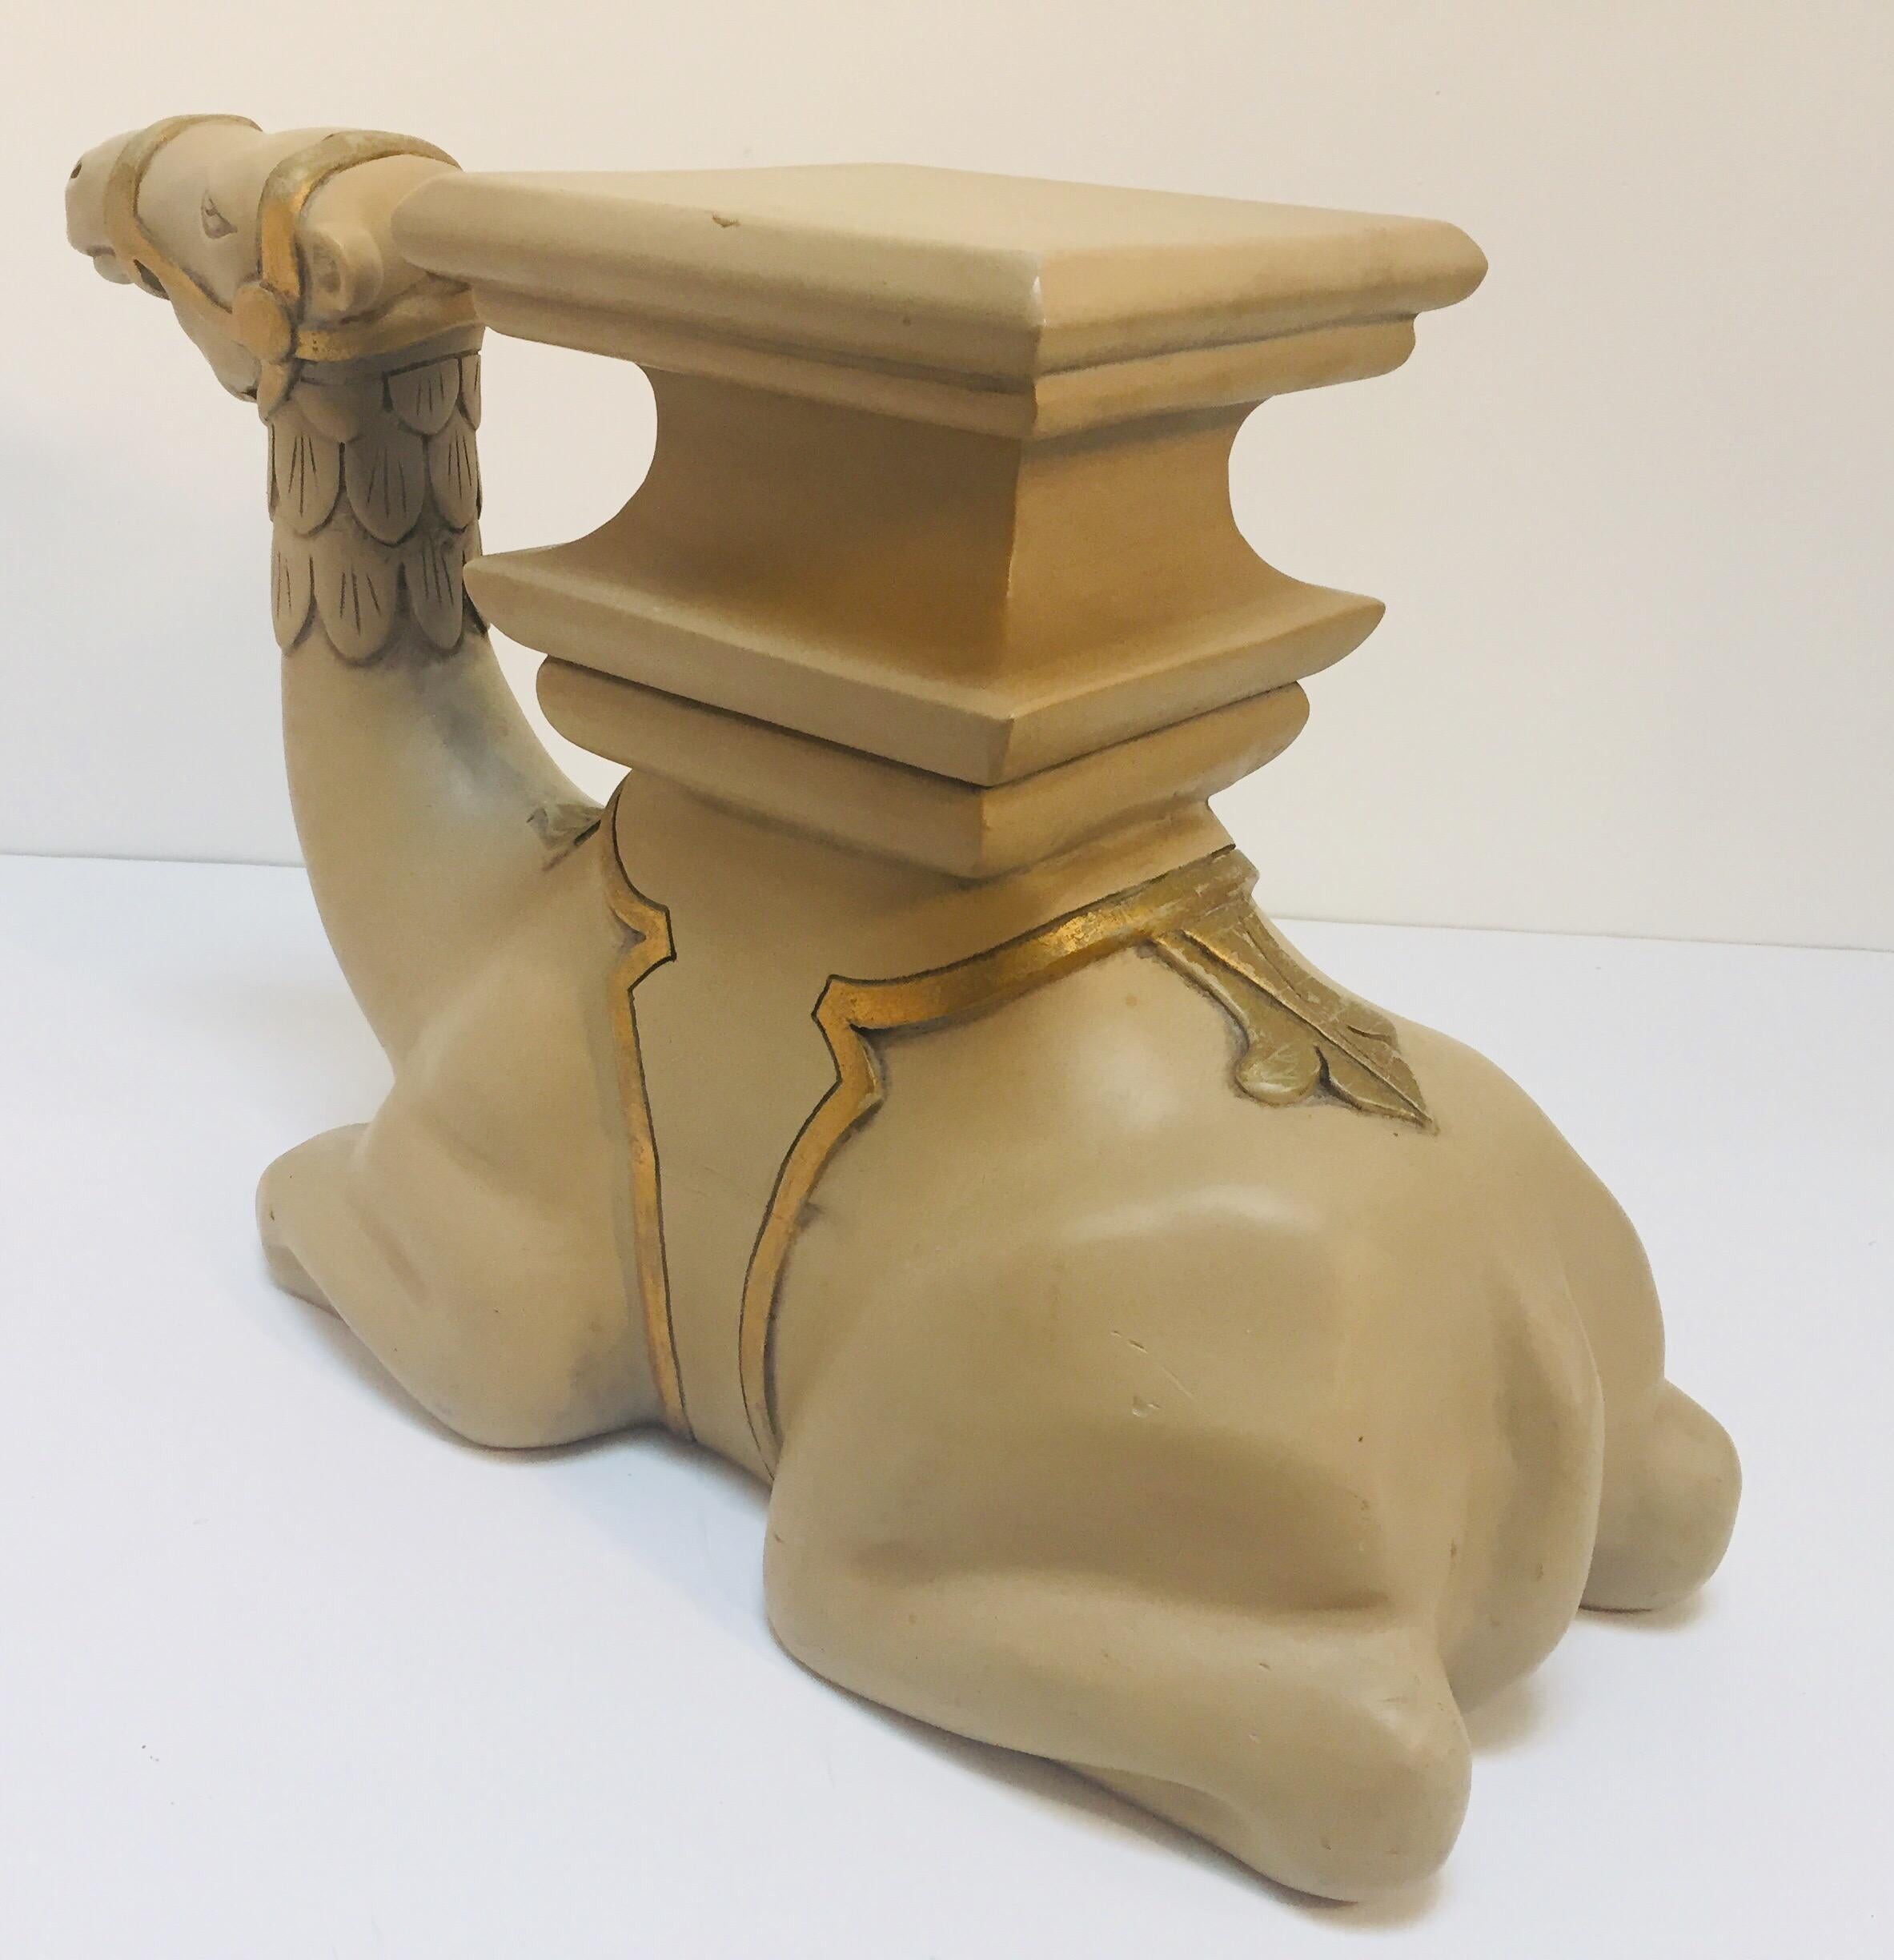 Pair of Camel Sculptures Stools or Side Tables 4